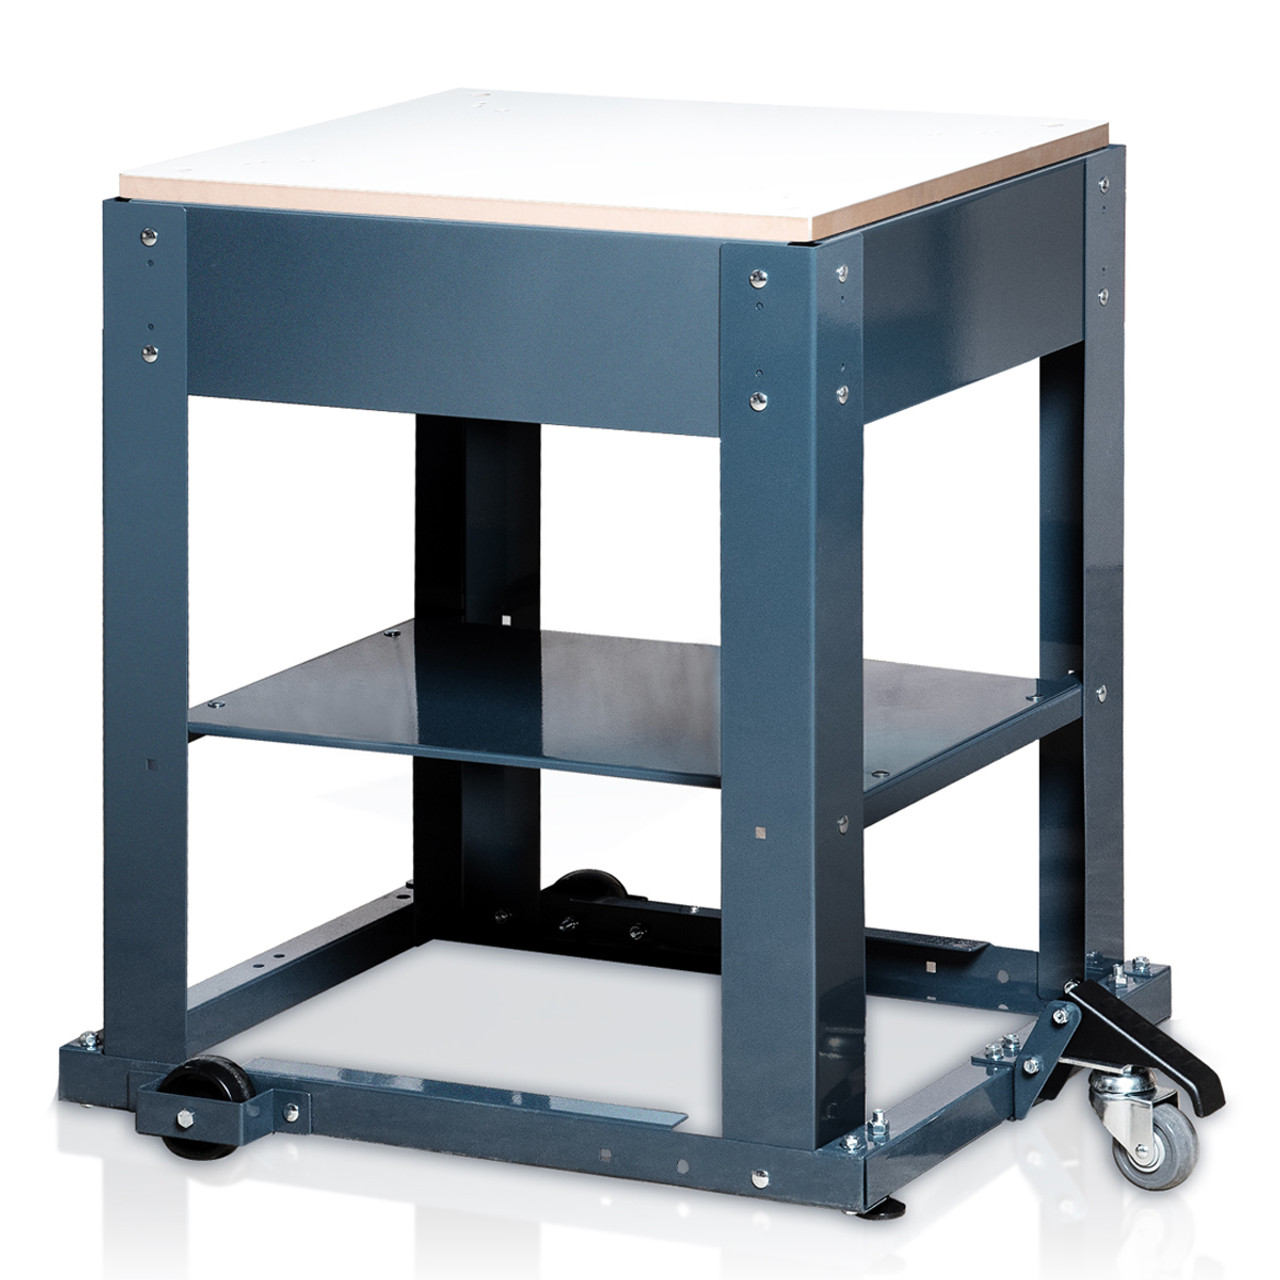 UT1008 Multi-Purpose Planer Table Stand with Wheels